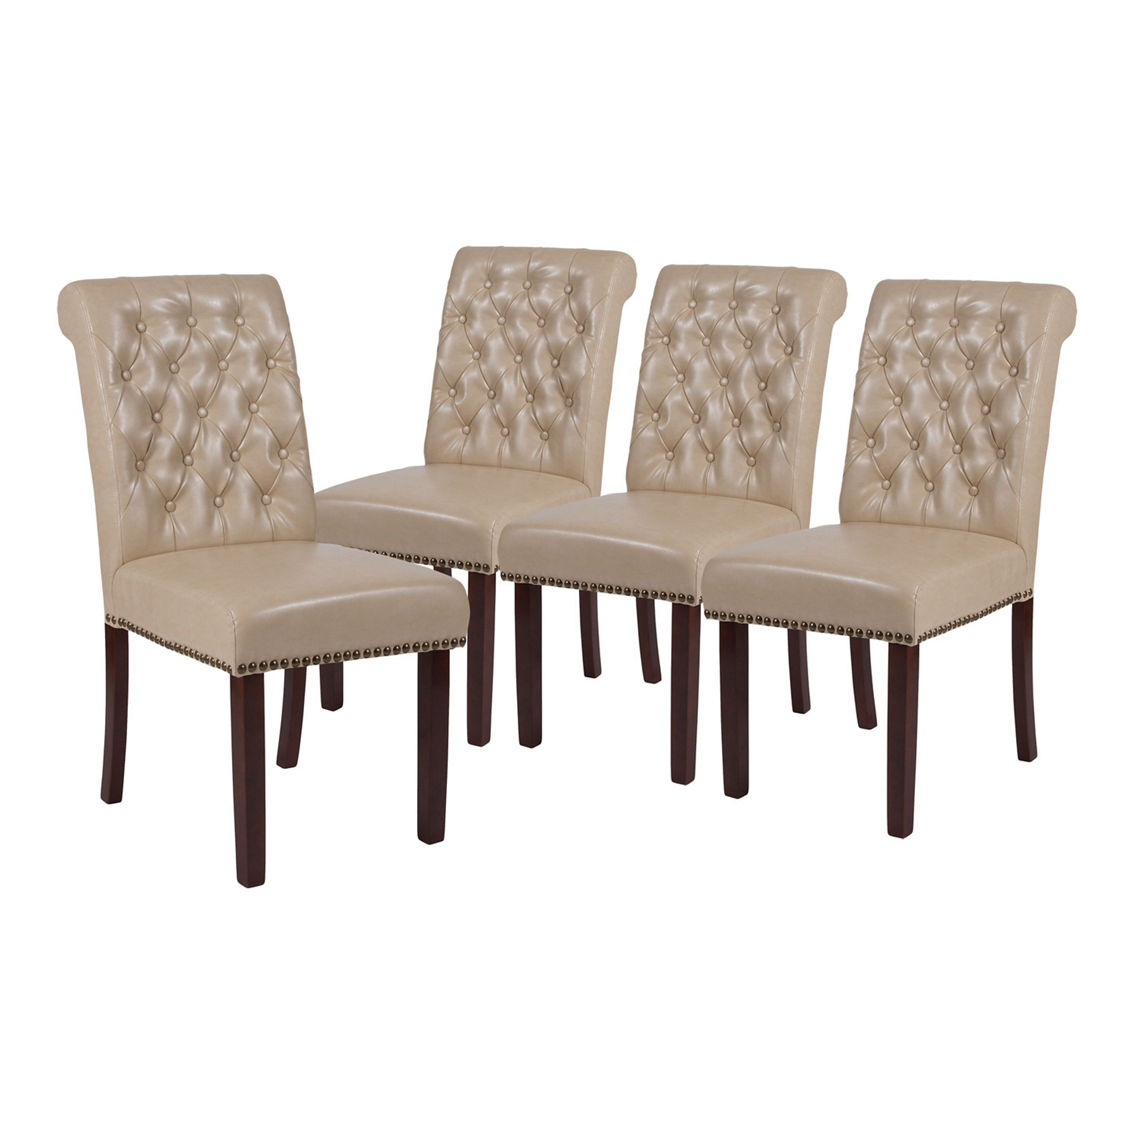 Flash Furniture 4PK Rolled Back Parsons Chairs - Image 3 of 5